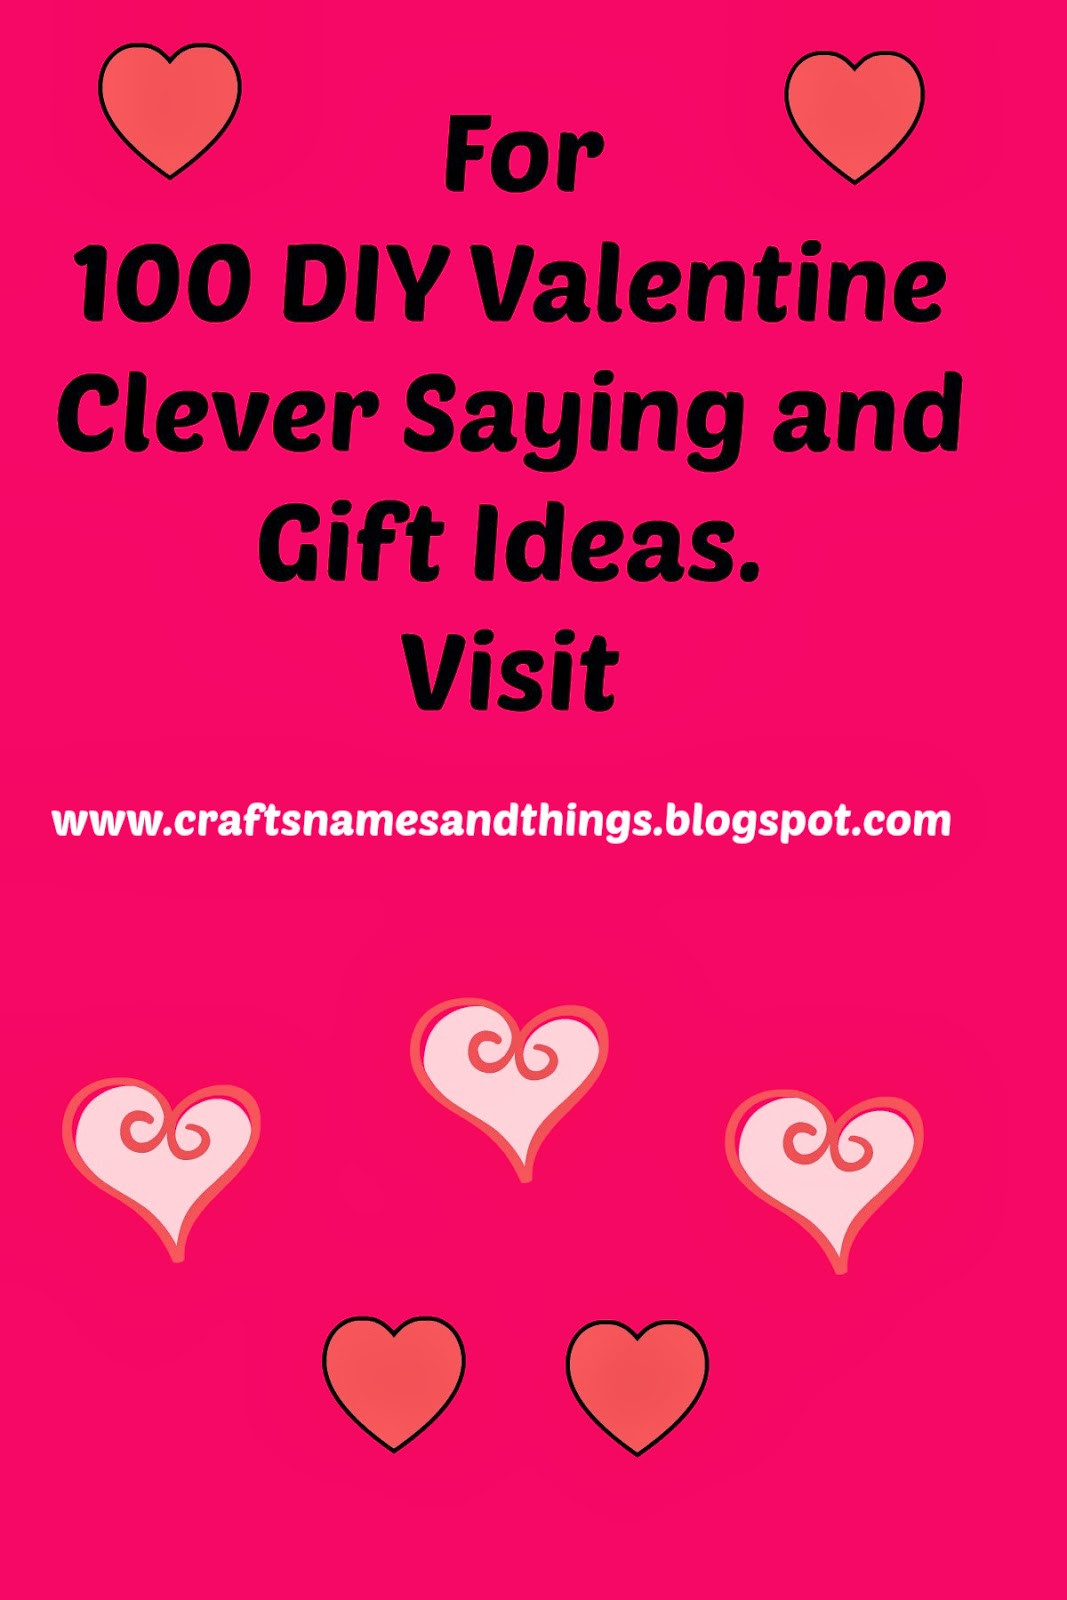 Cheesy Valentines Day Quotes
 Crafts Names And Things 100 DIY Valentine Ideas and